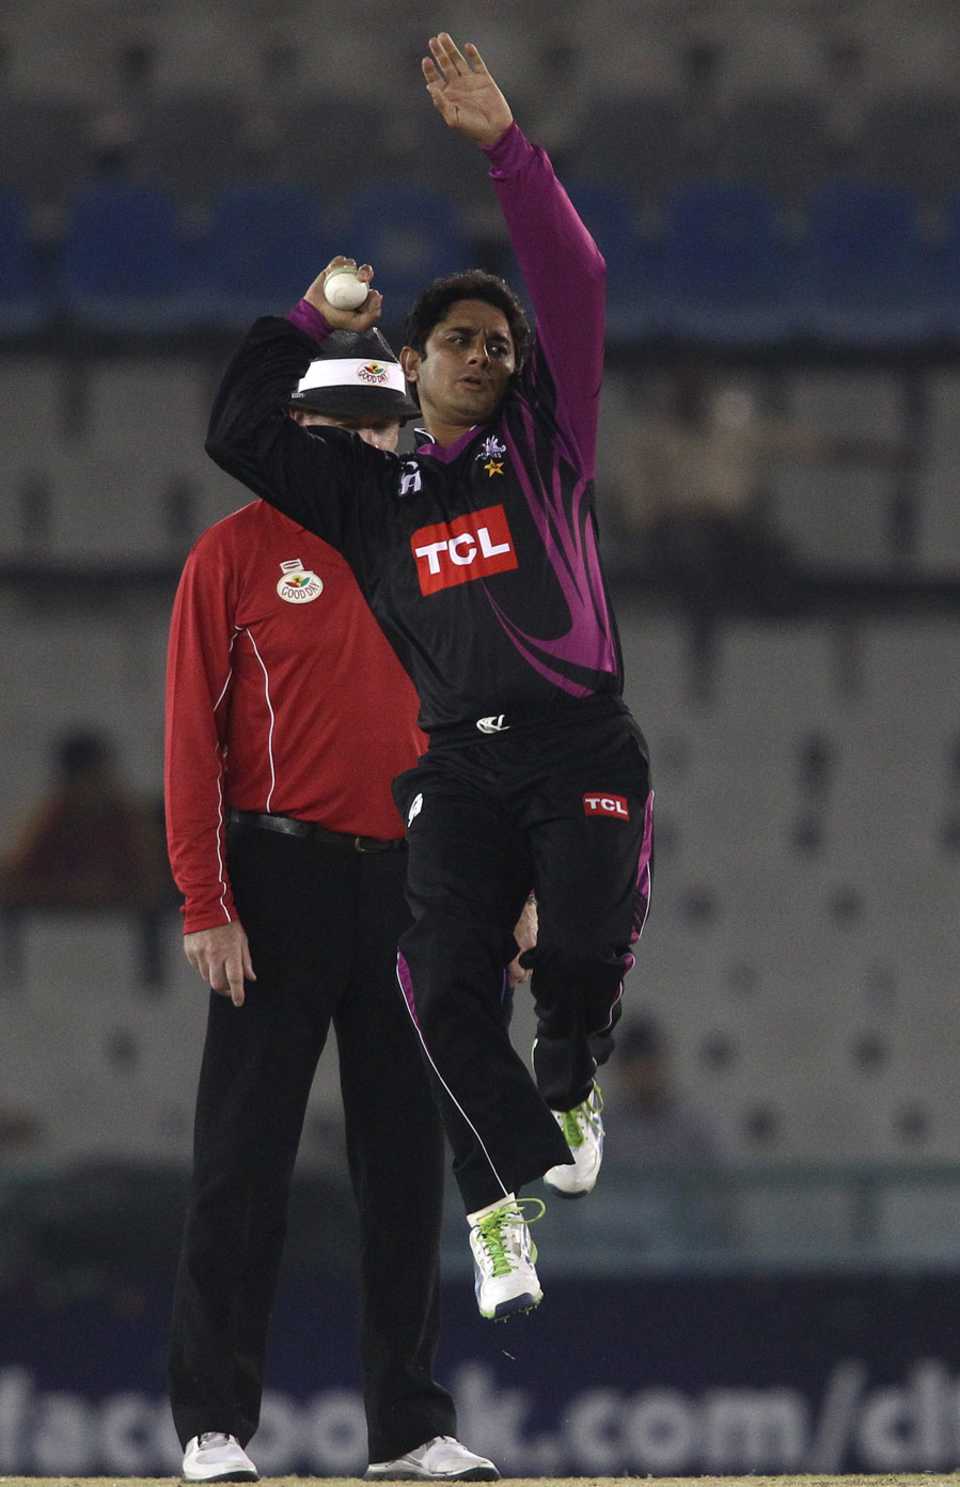 Saeed Ajmal went wicketless in the innings